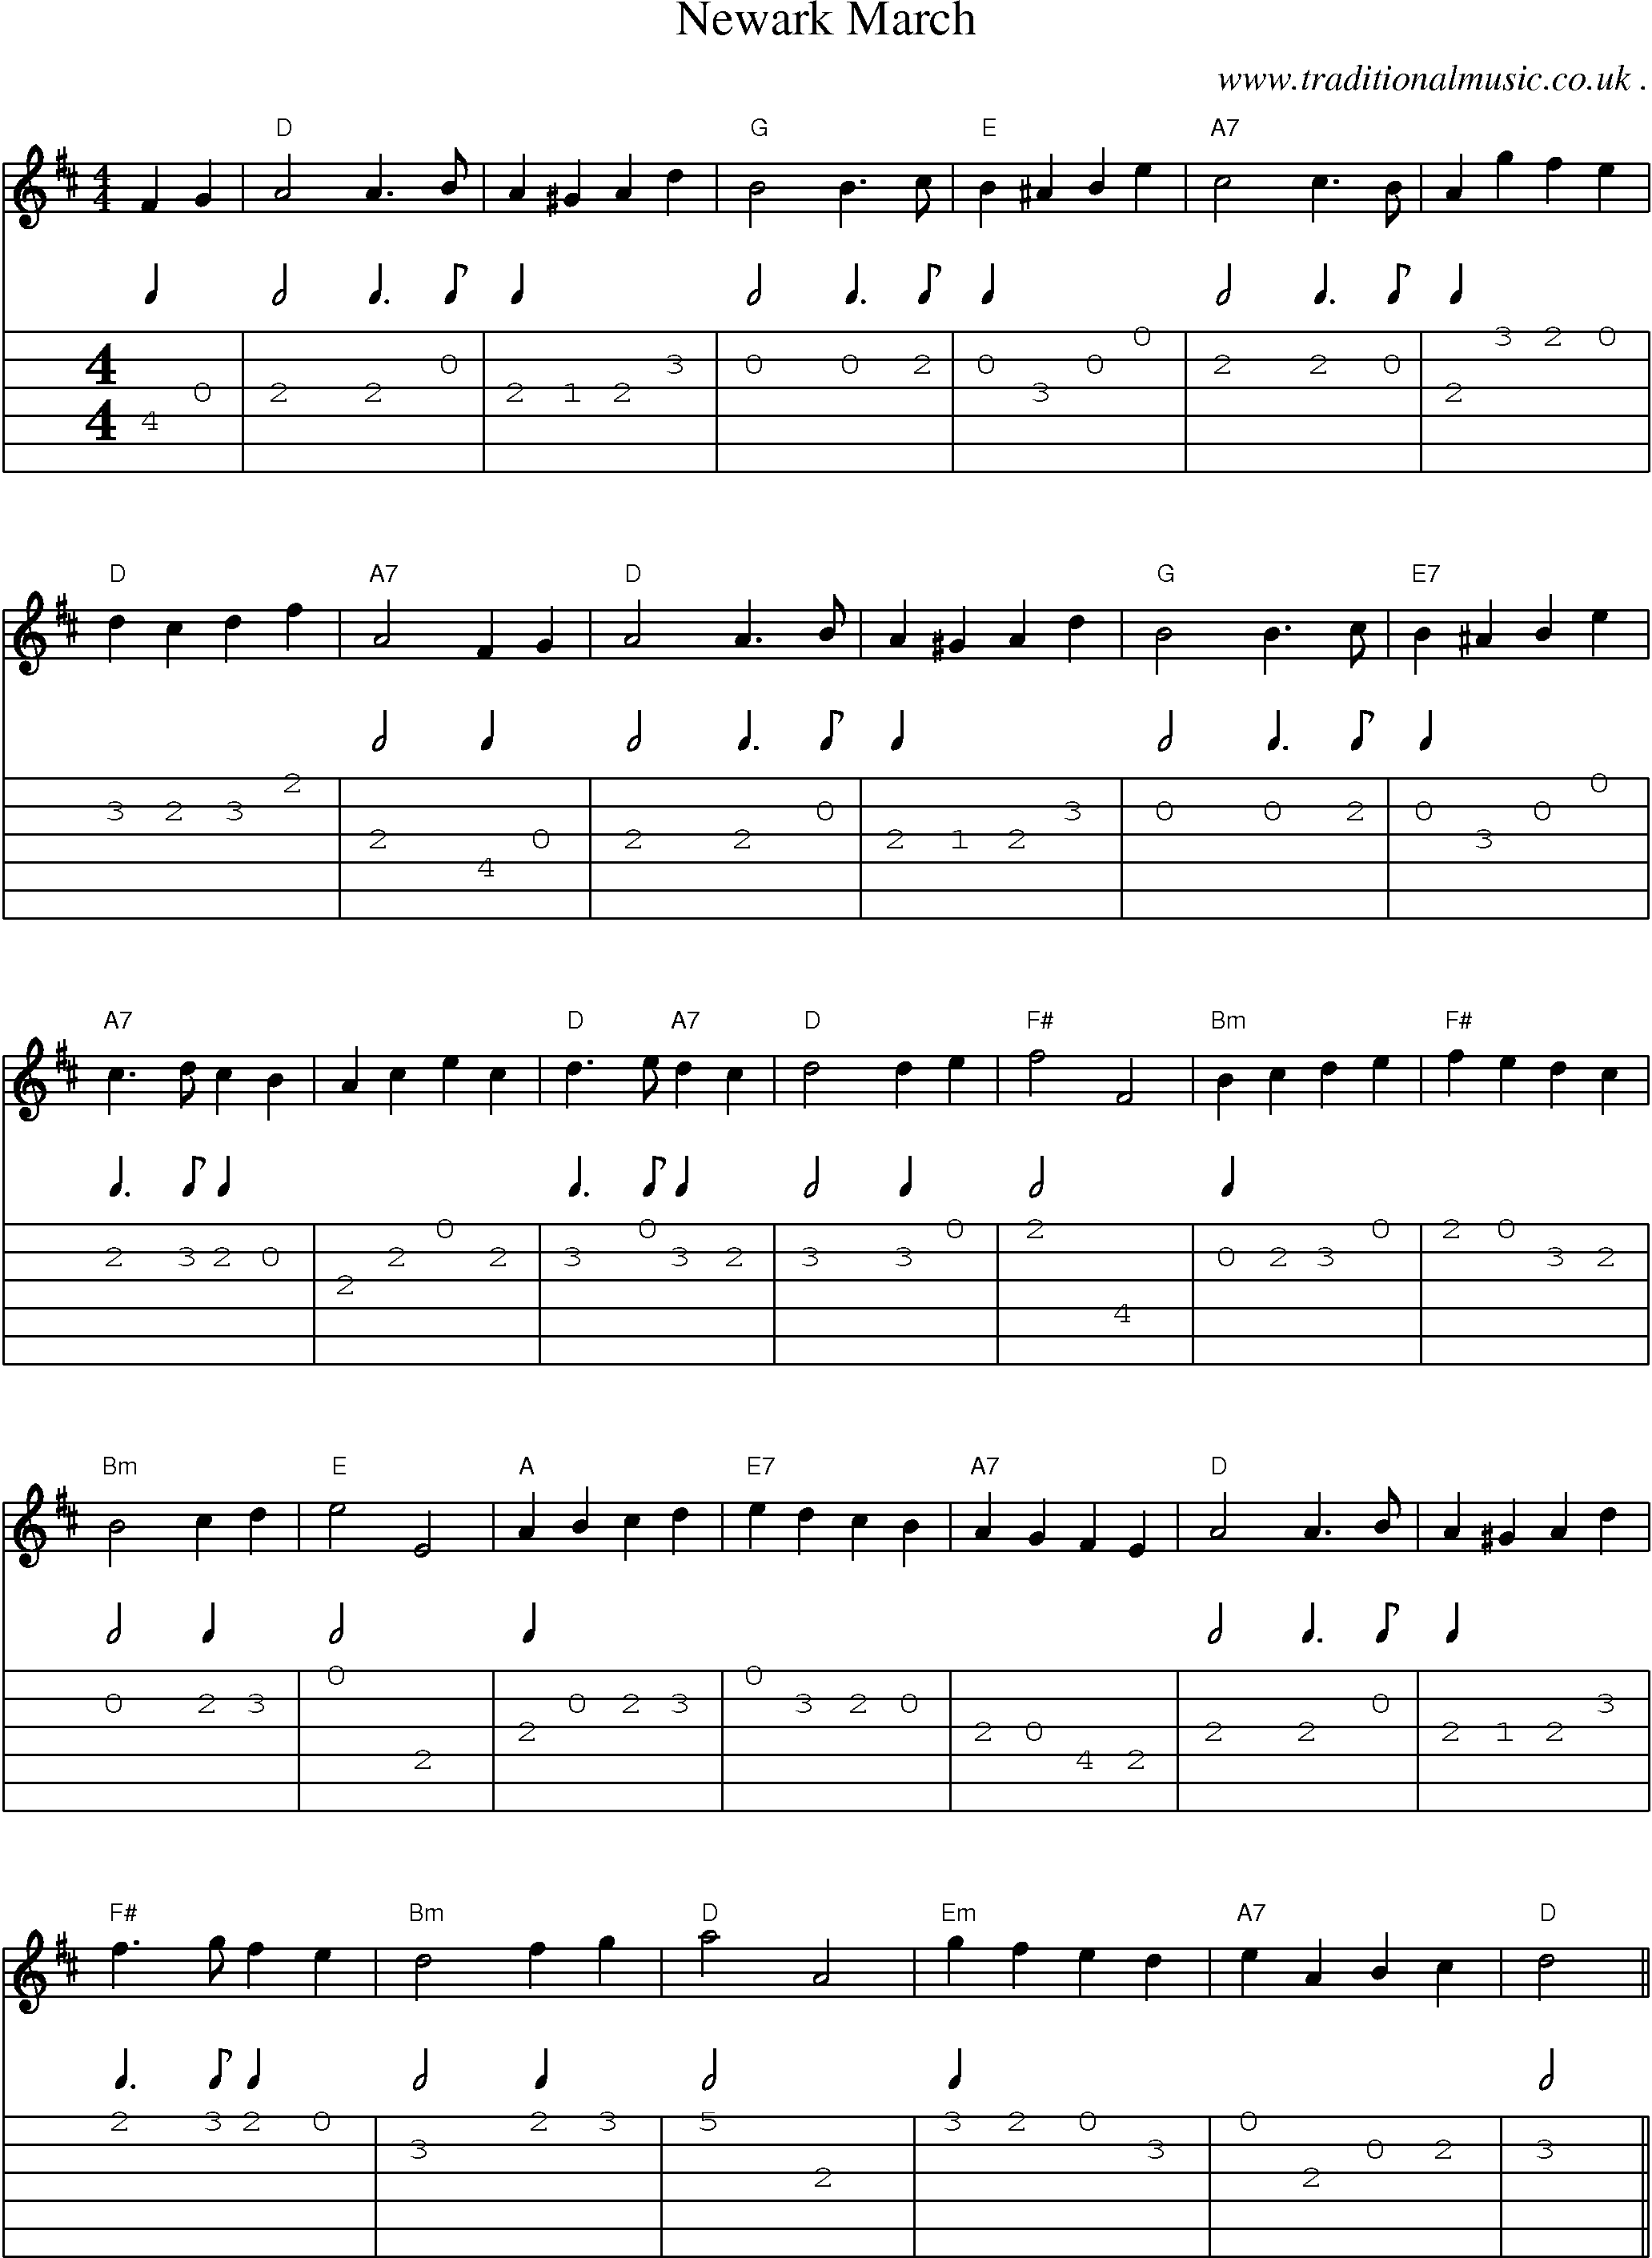 Sheet-Music and Guitar Tabs for Newark March